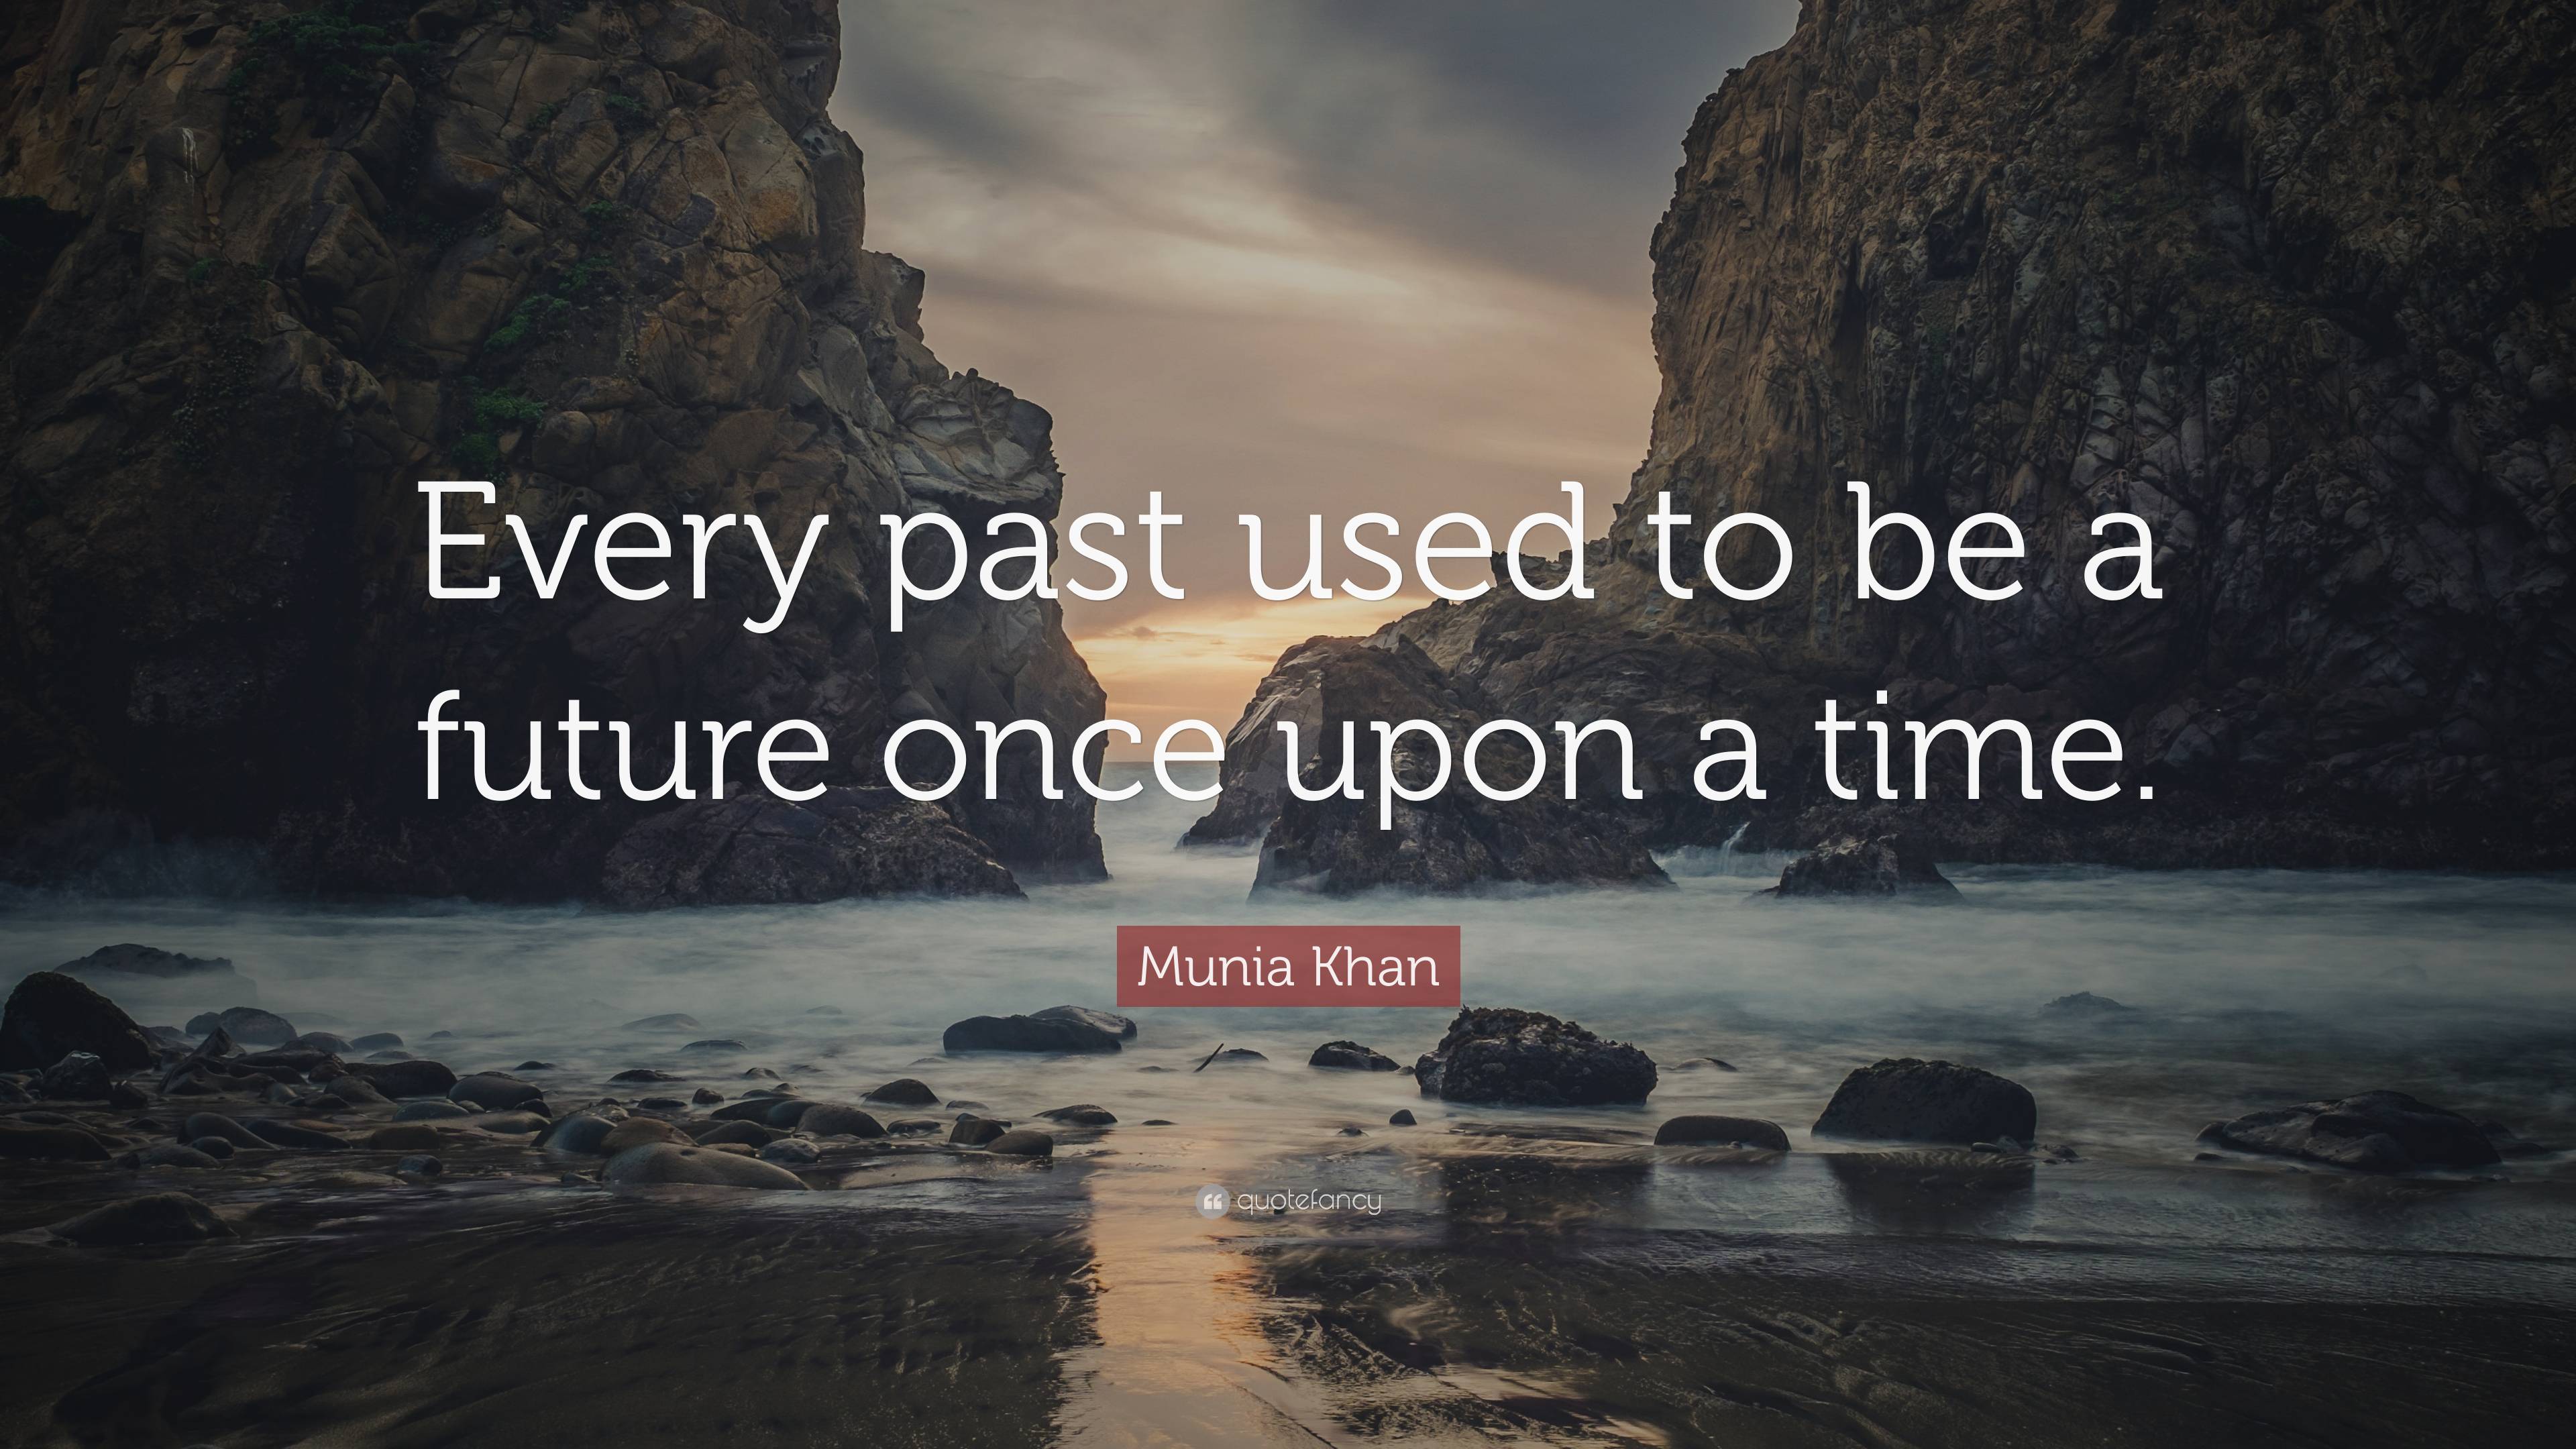 Munia Khan Quote: “Every past used to be a future once upon a time.”